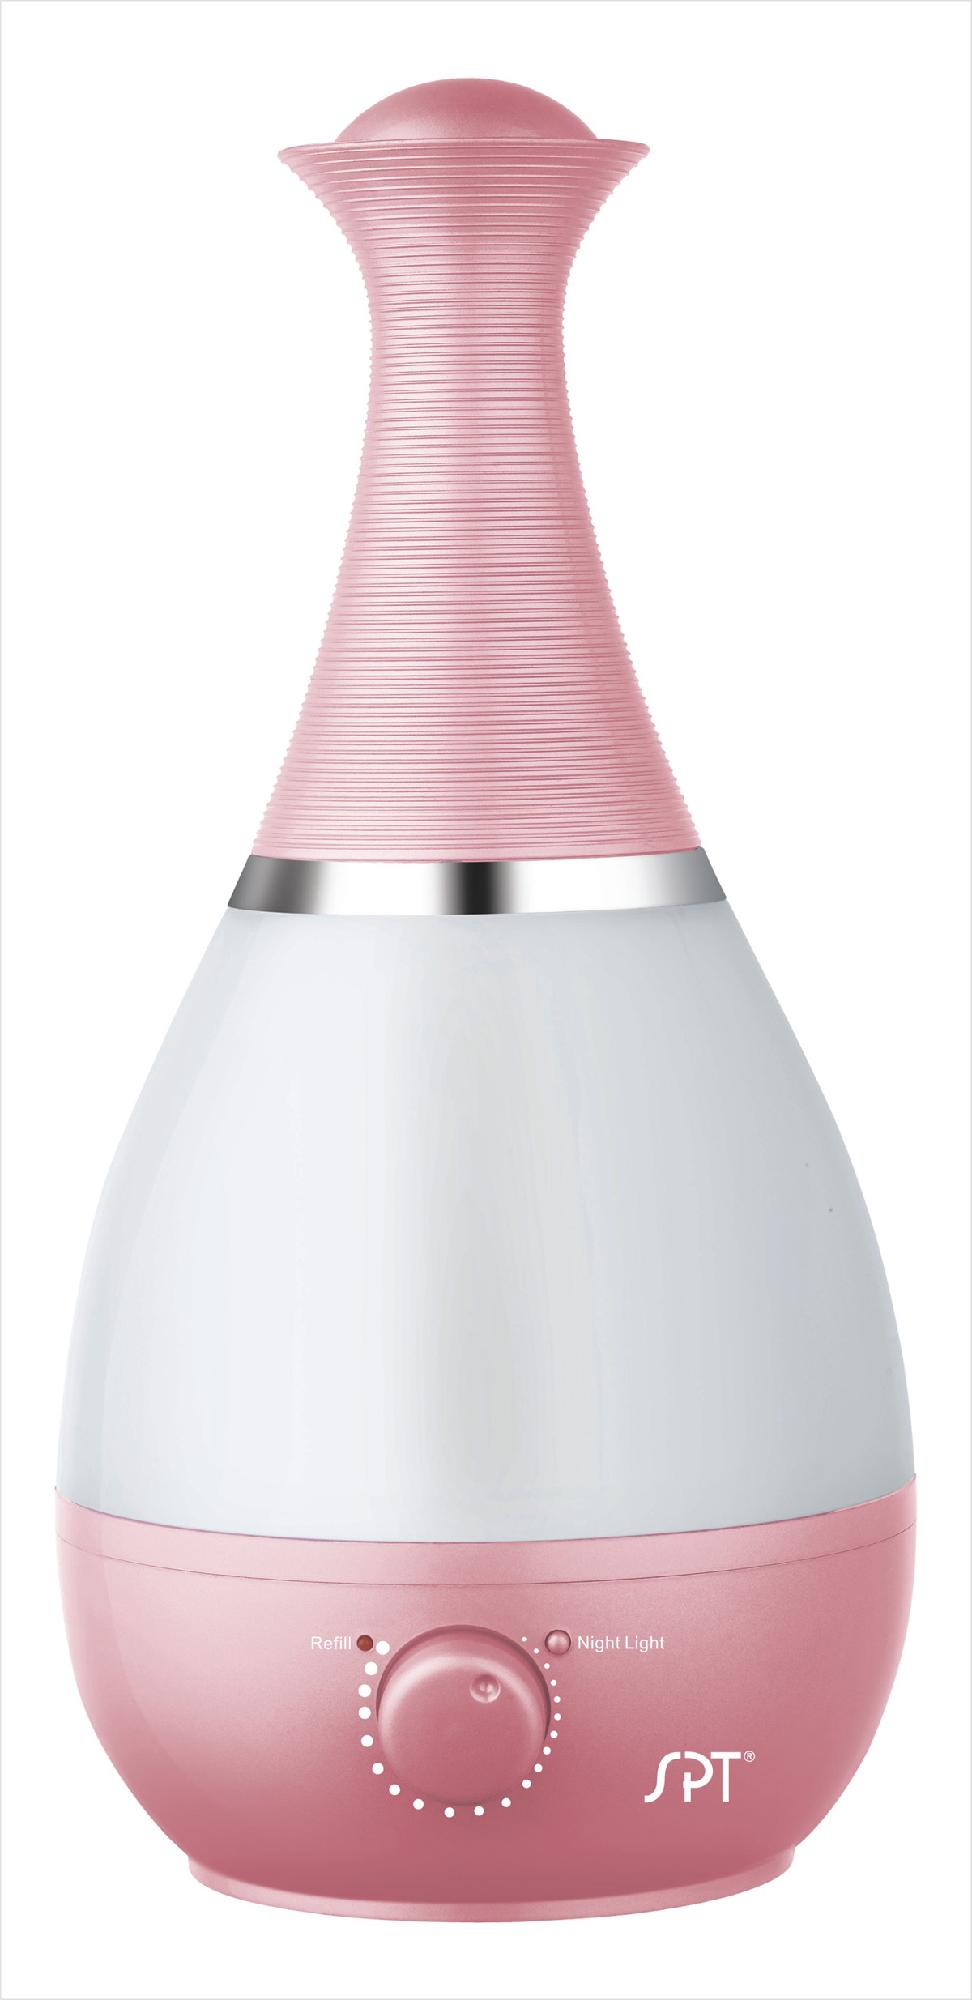 SPT SU-2550P  Ultrasonic Humidifier with Frangrance Diffuser (Pink)